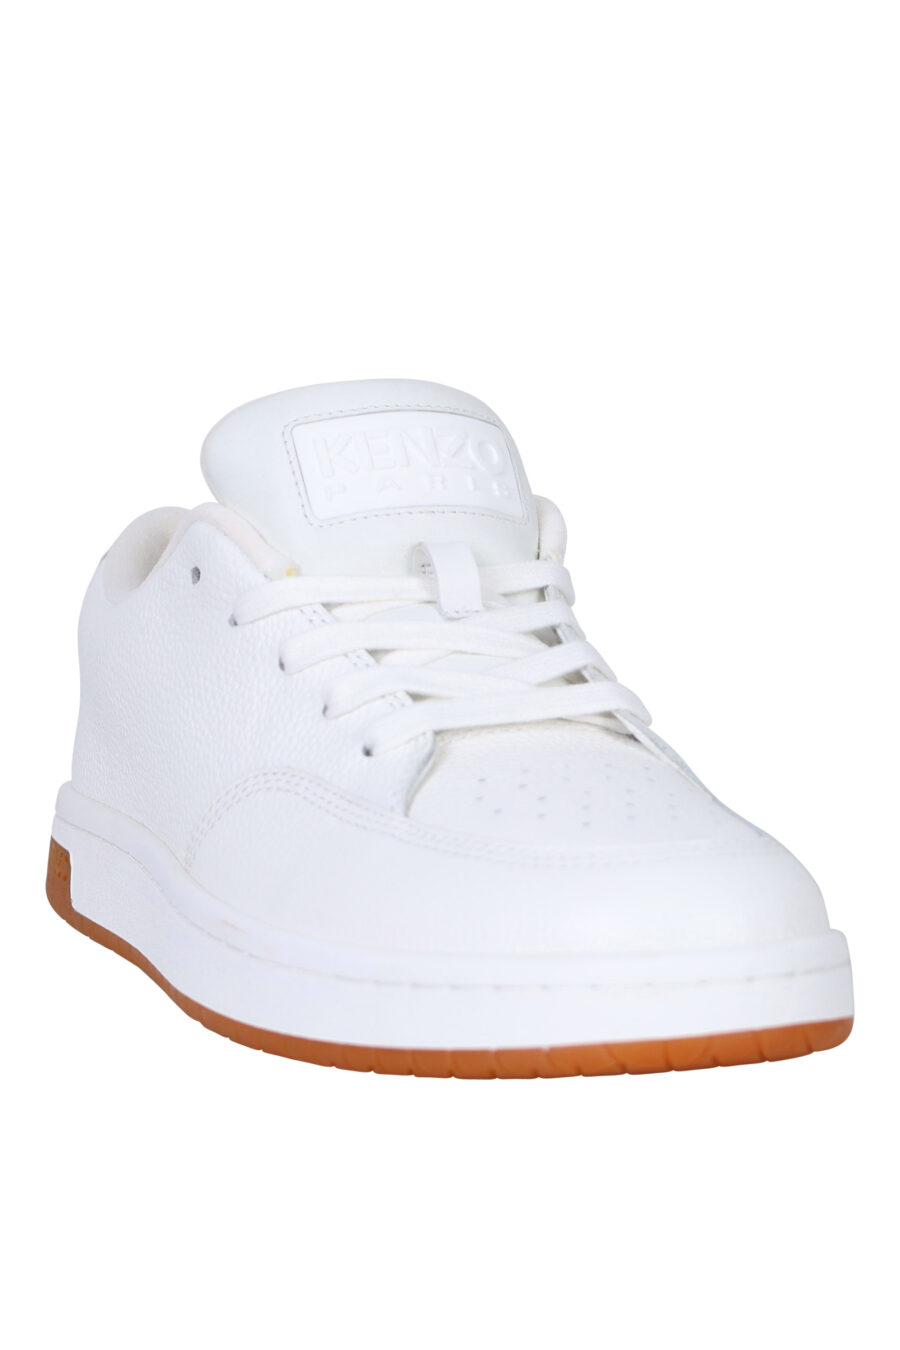 White trainers "kenzo dome" with minilogo and brown sole - 3612230556089 1